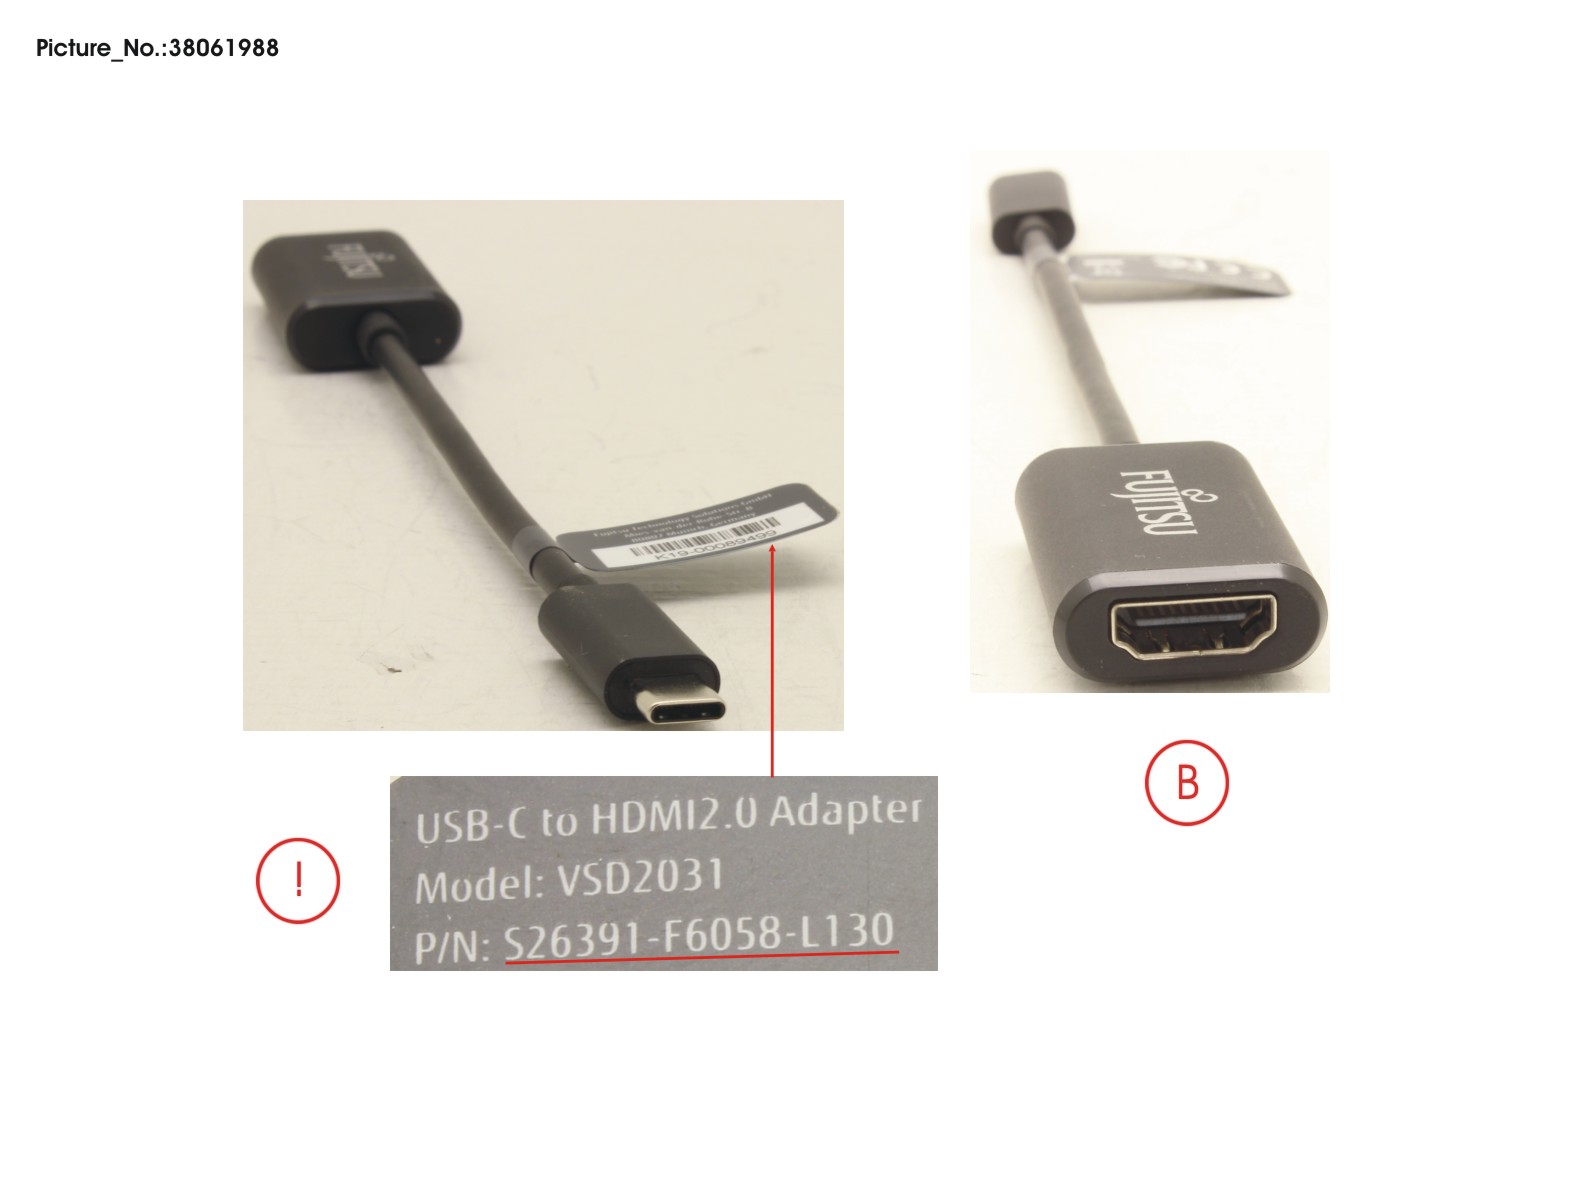 USB-C TO HDMI2.0 ADAPTER